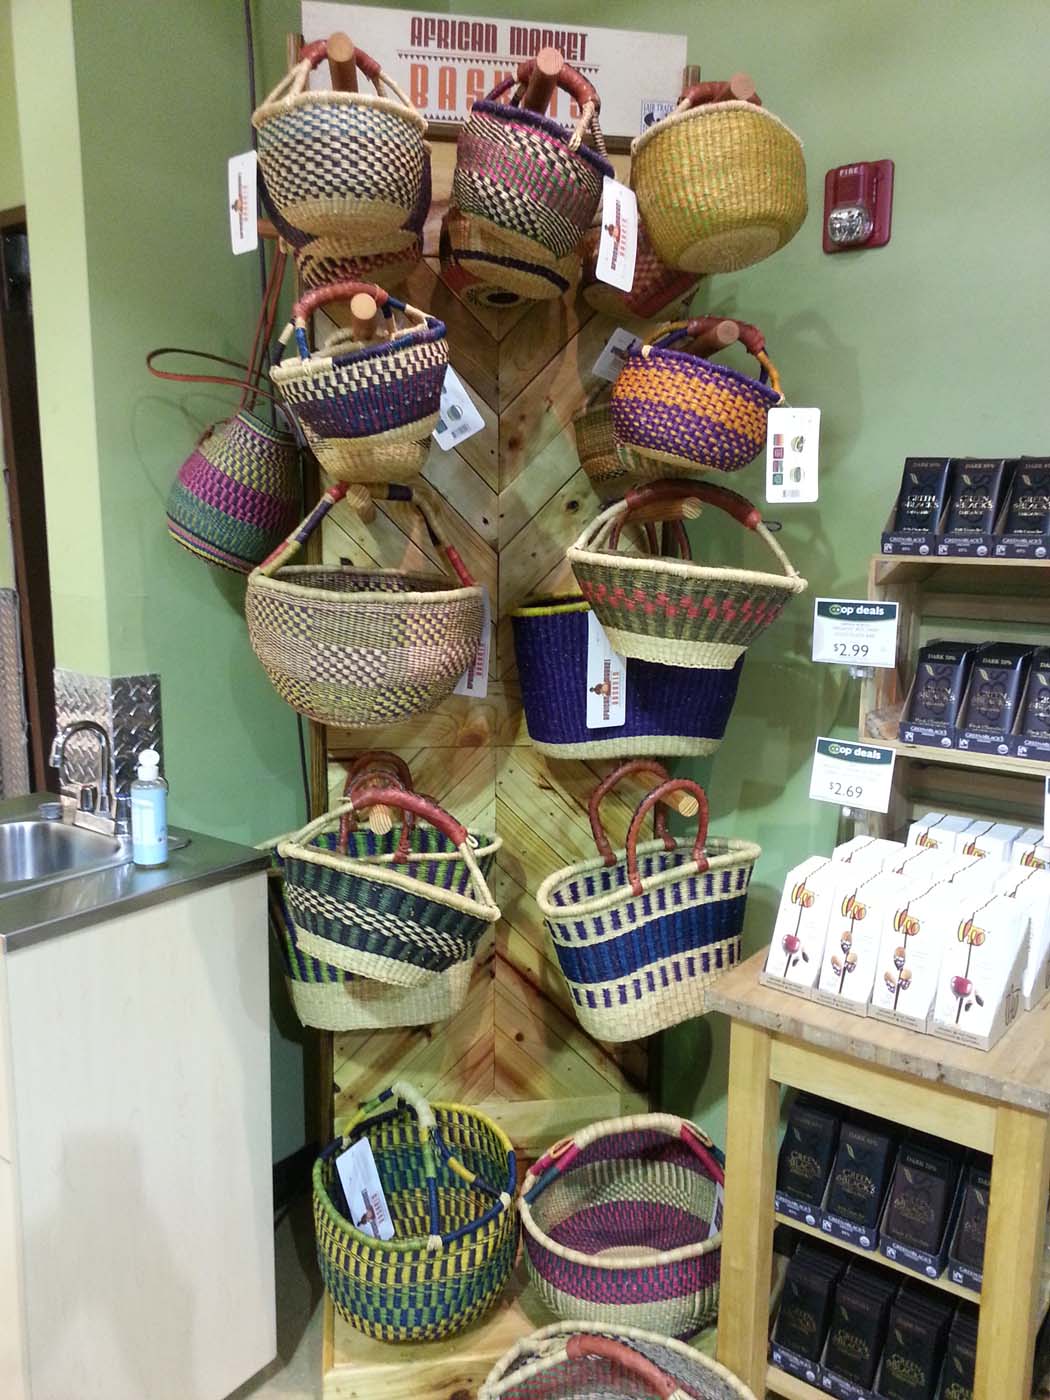 Bolga baskets grab your attention even when tucked into corners